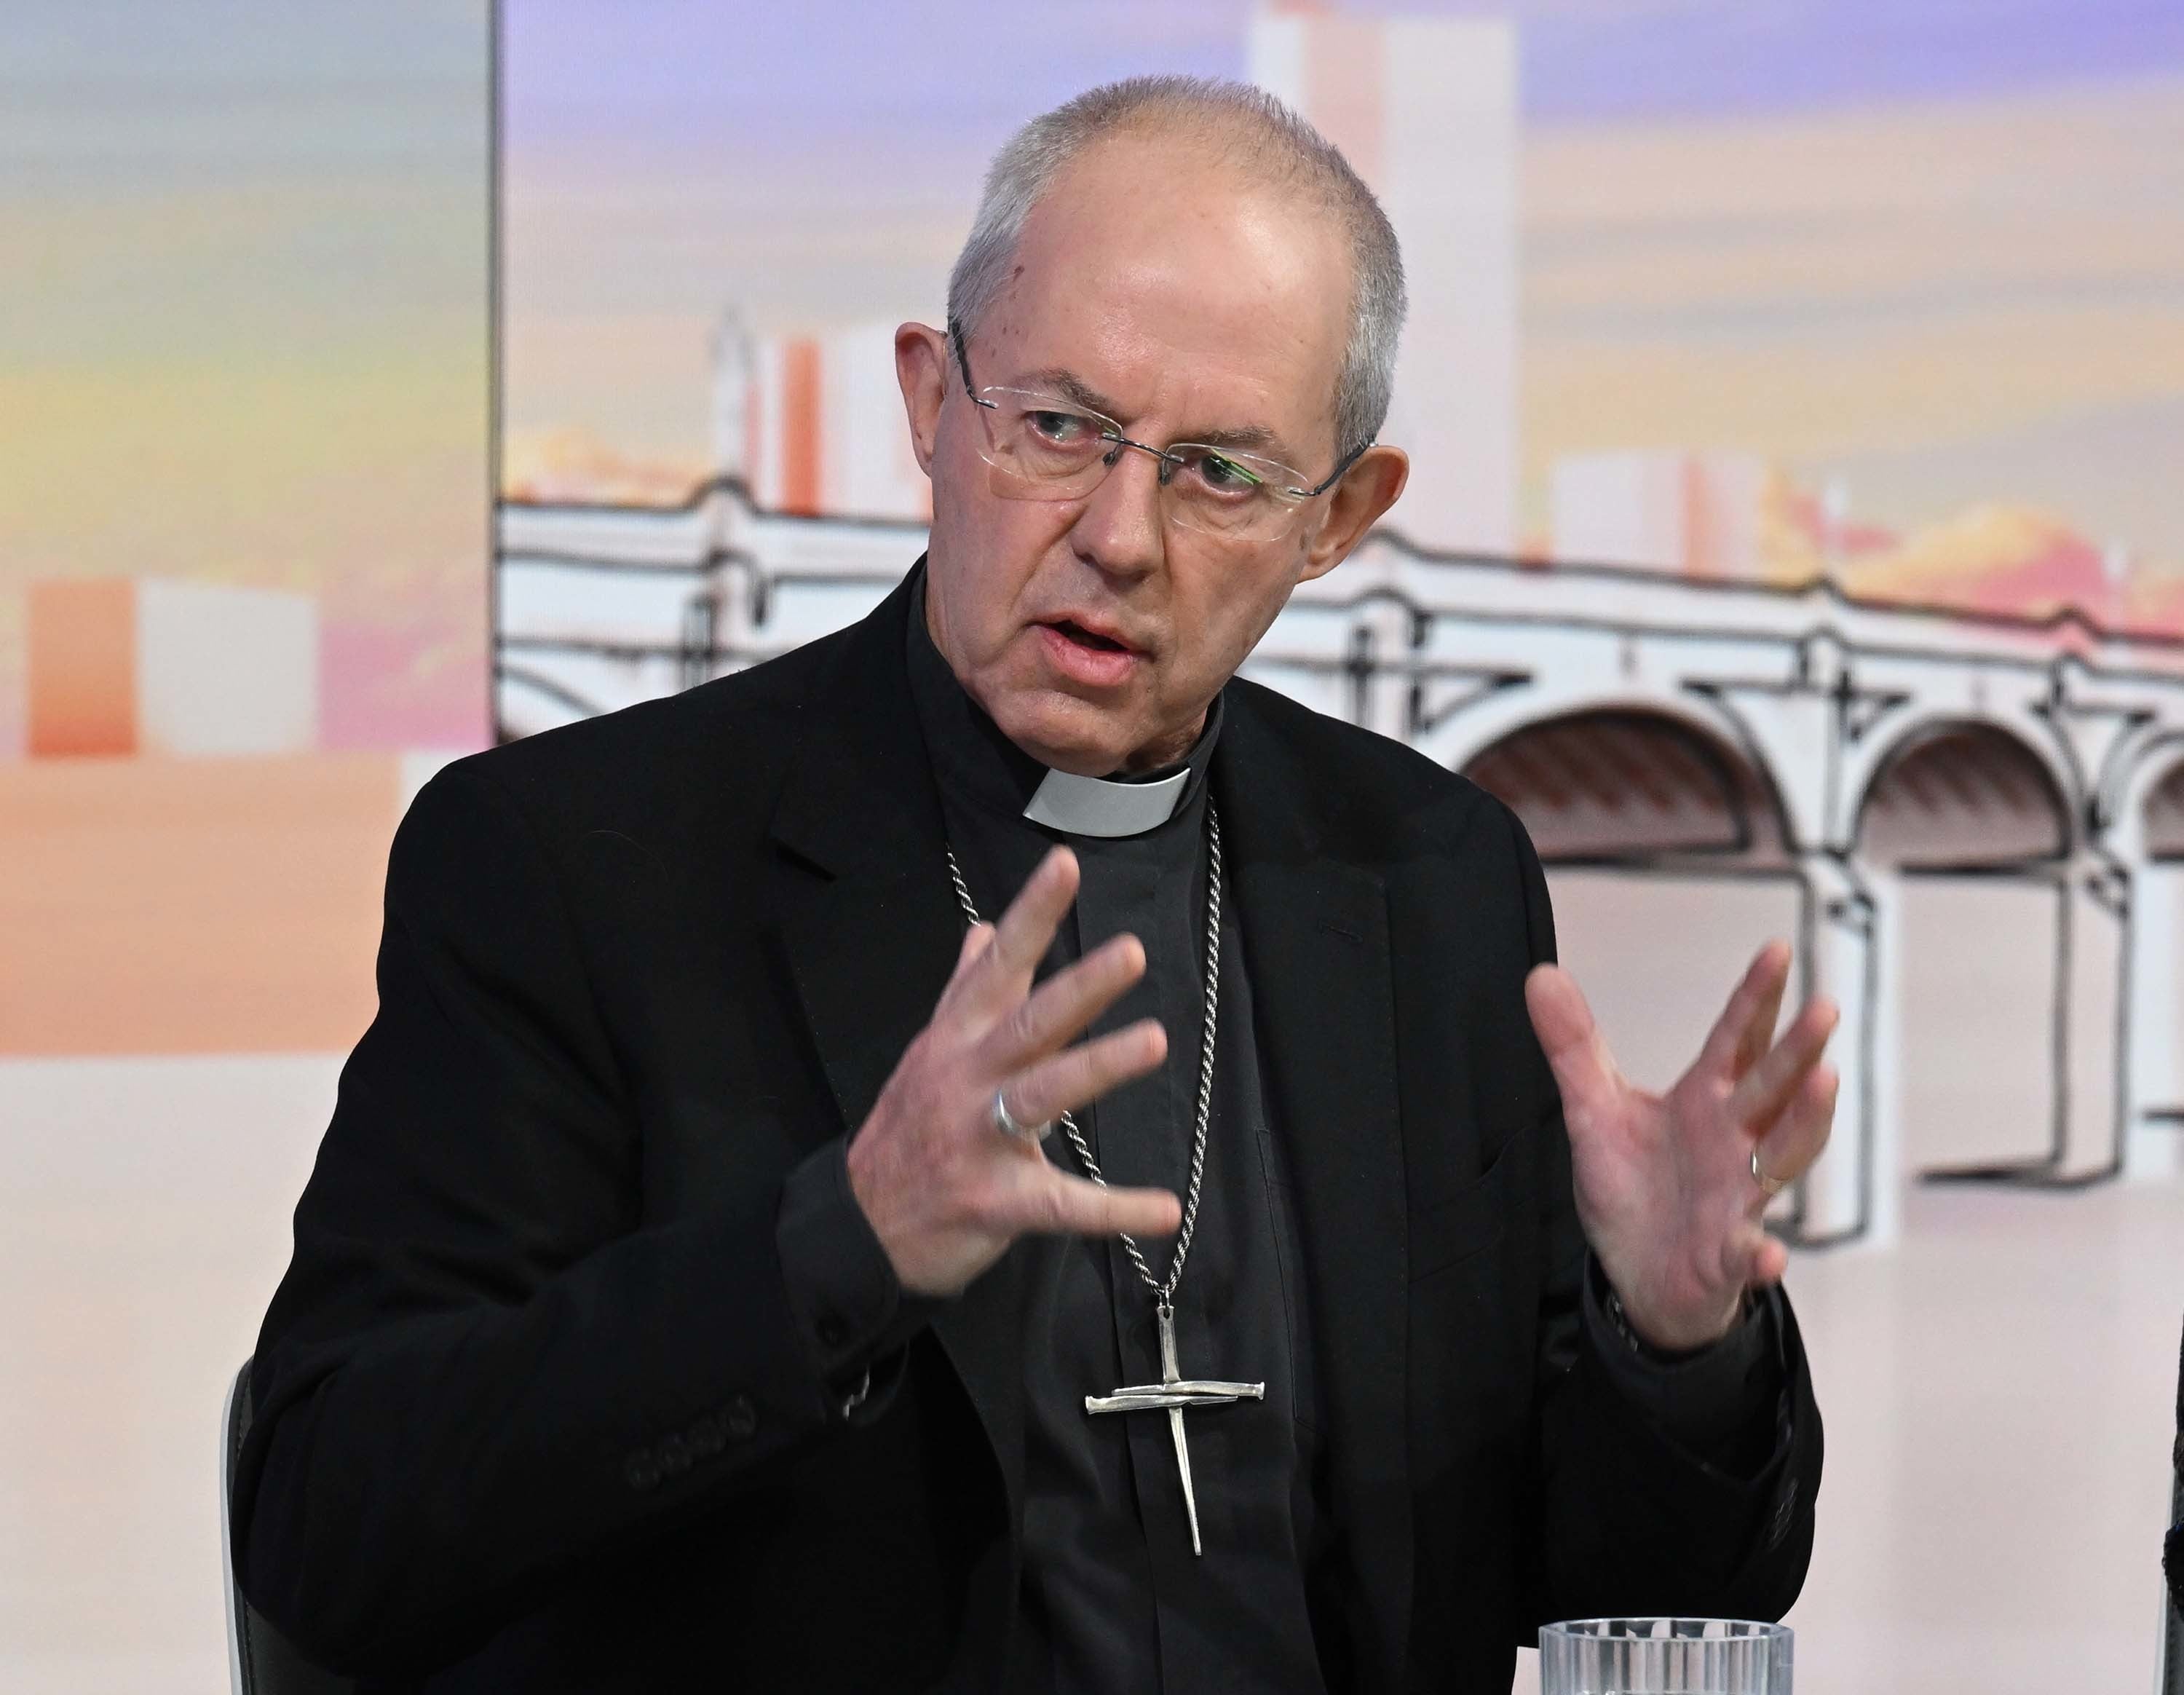 Justin Welby said the country needs to “rise to the challenge”